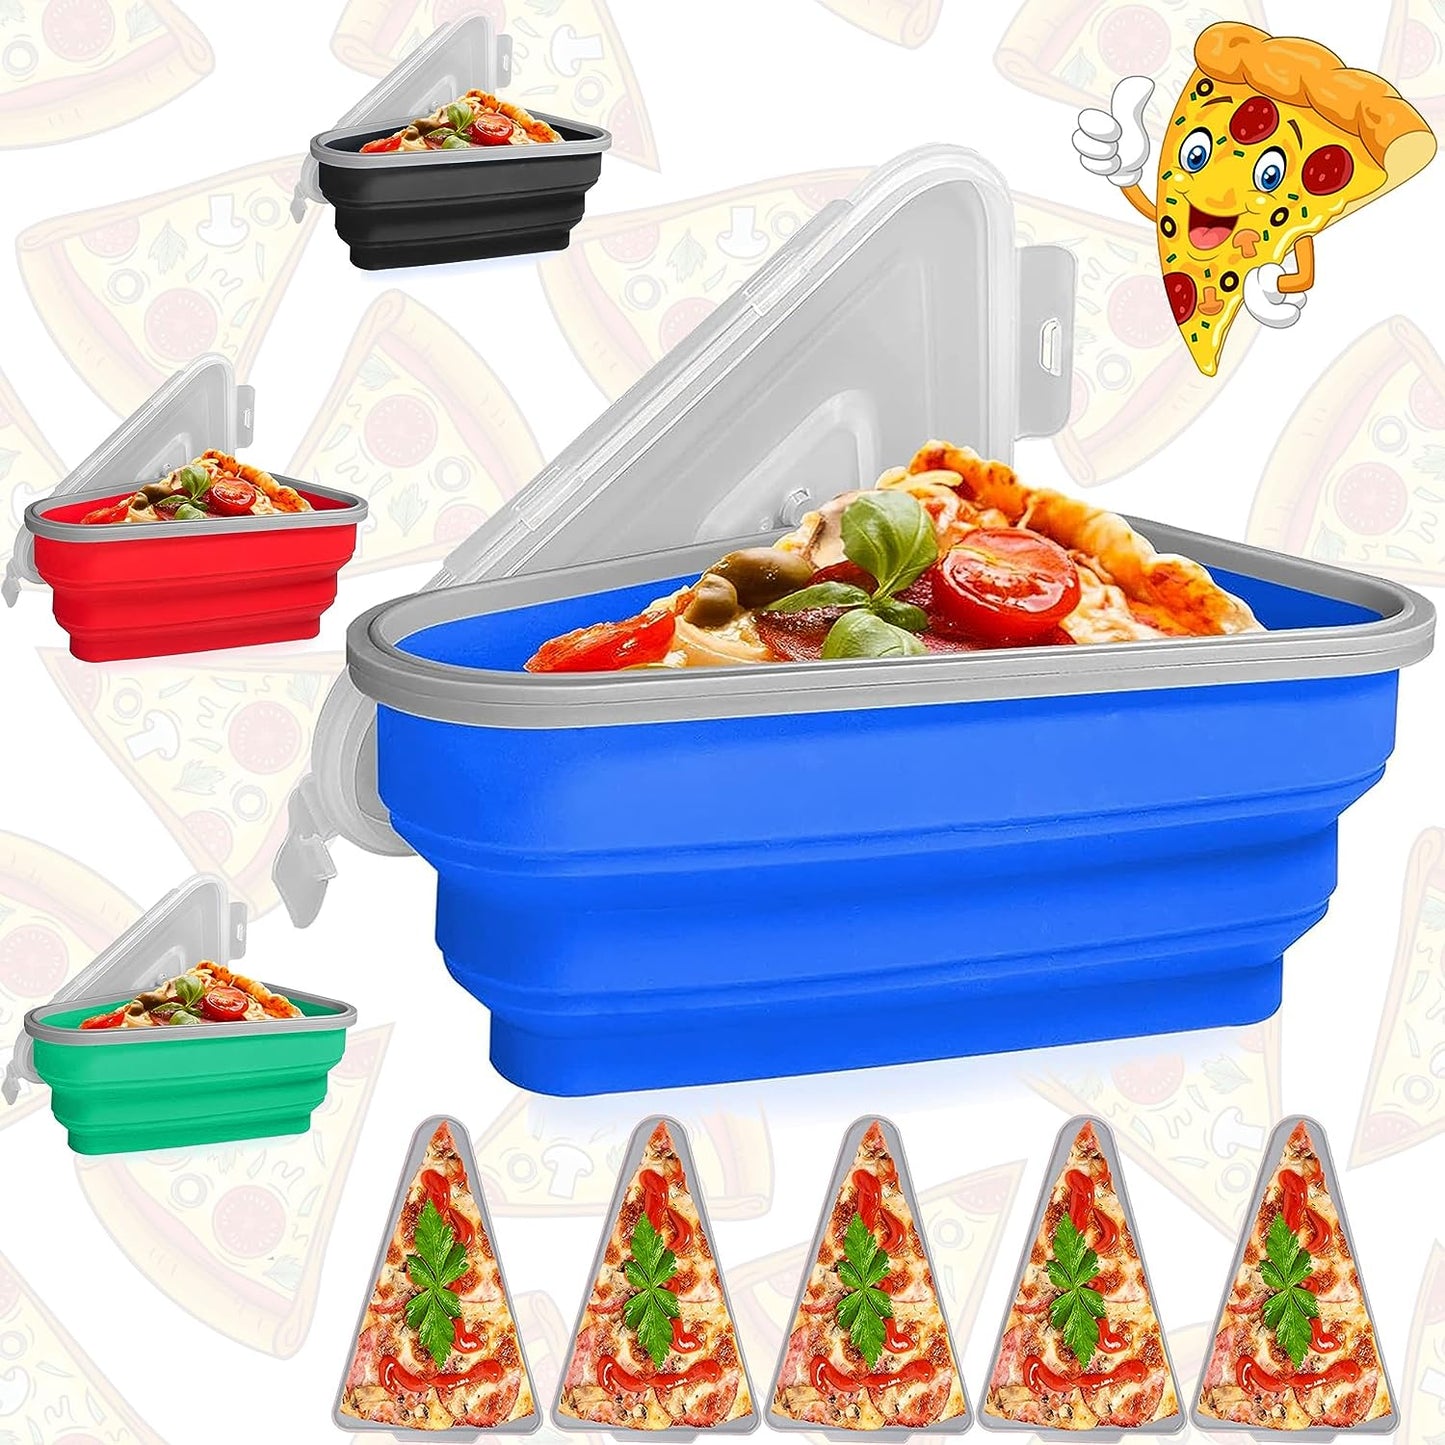 Al Razaak Pizza Storage Container Silicone Collapsible includes 5 trays, Reusable Pizza Storage Container, Saves Fridge Space - Microwave & Dishwasher Safe, Pizza Slice Pack Storage Container Expandable, Leftover Pizza Slice Storage Container Saver, Silic